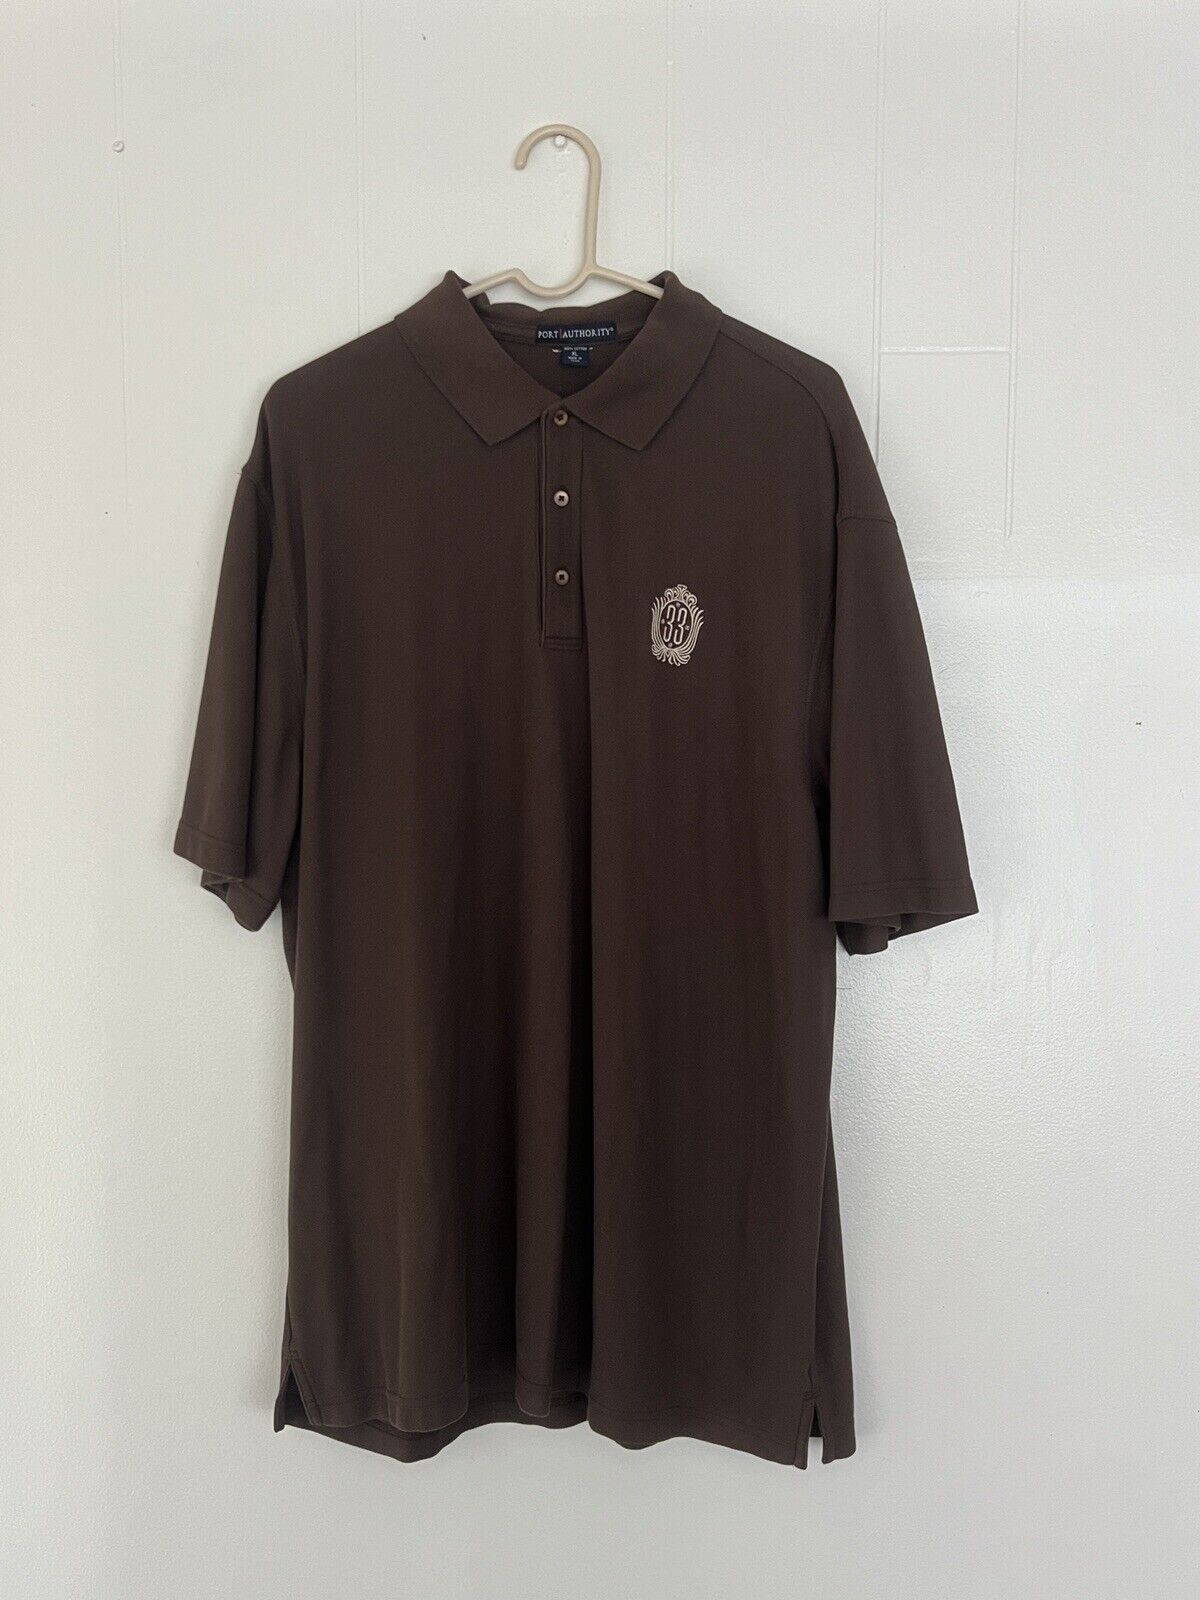 Disneyland Retired Club 33 Men's Port Authority XL Polo Shirt Brown Pre owned